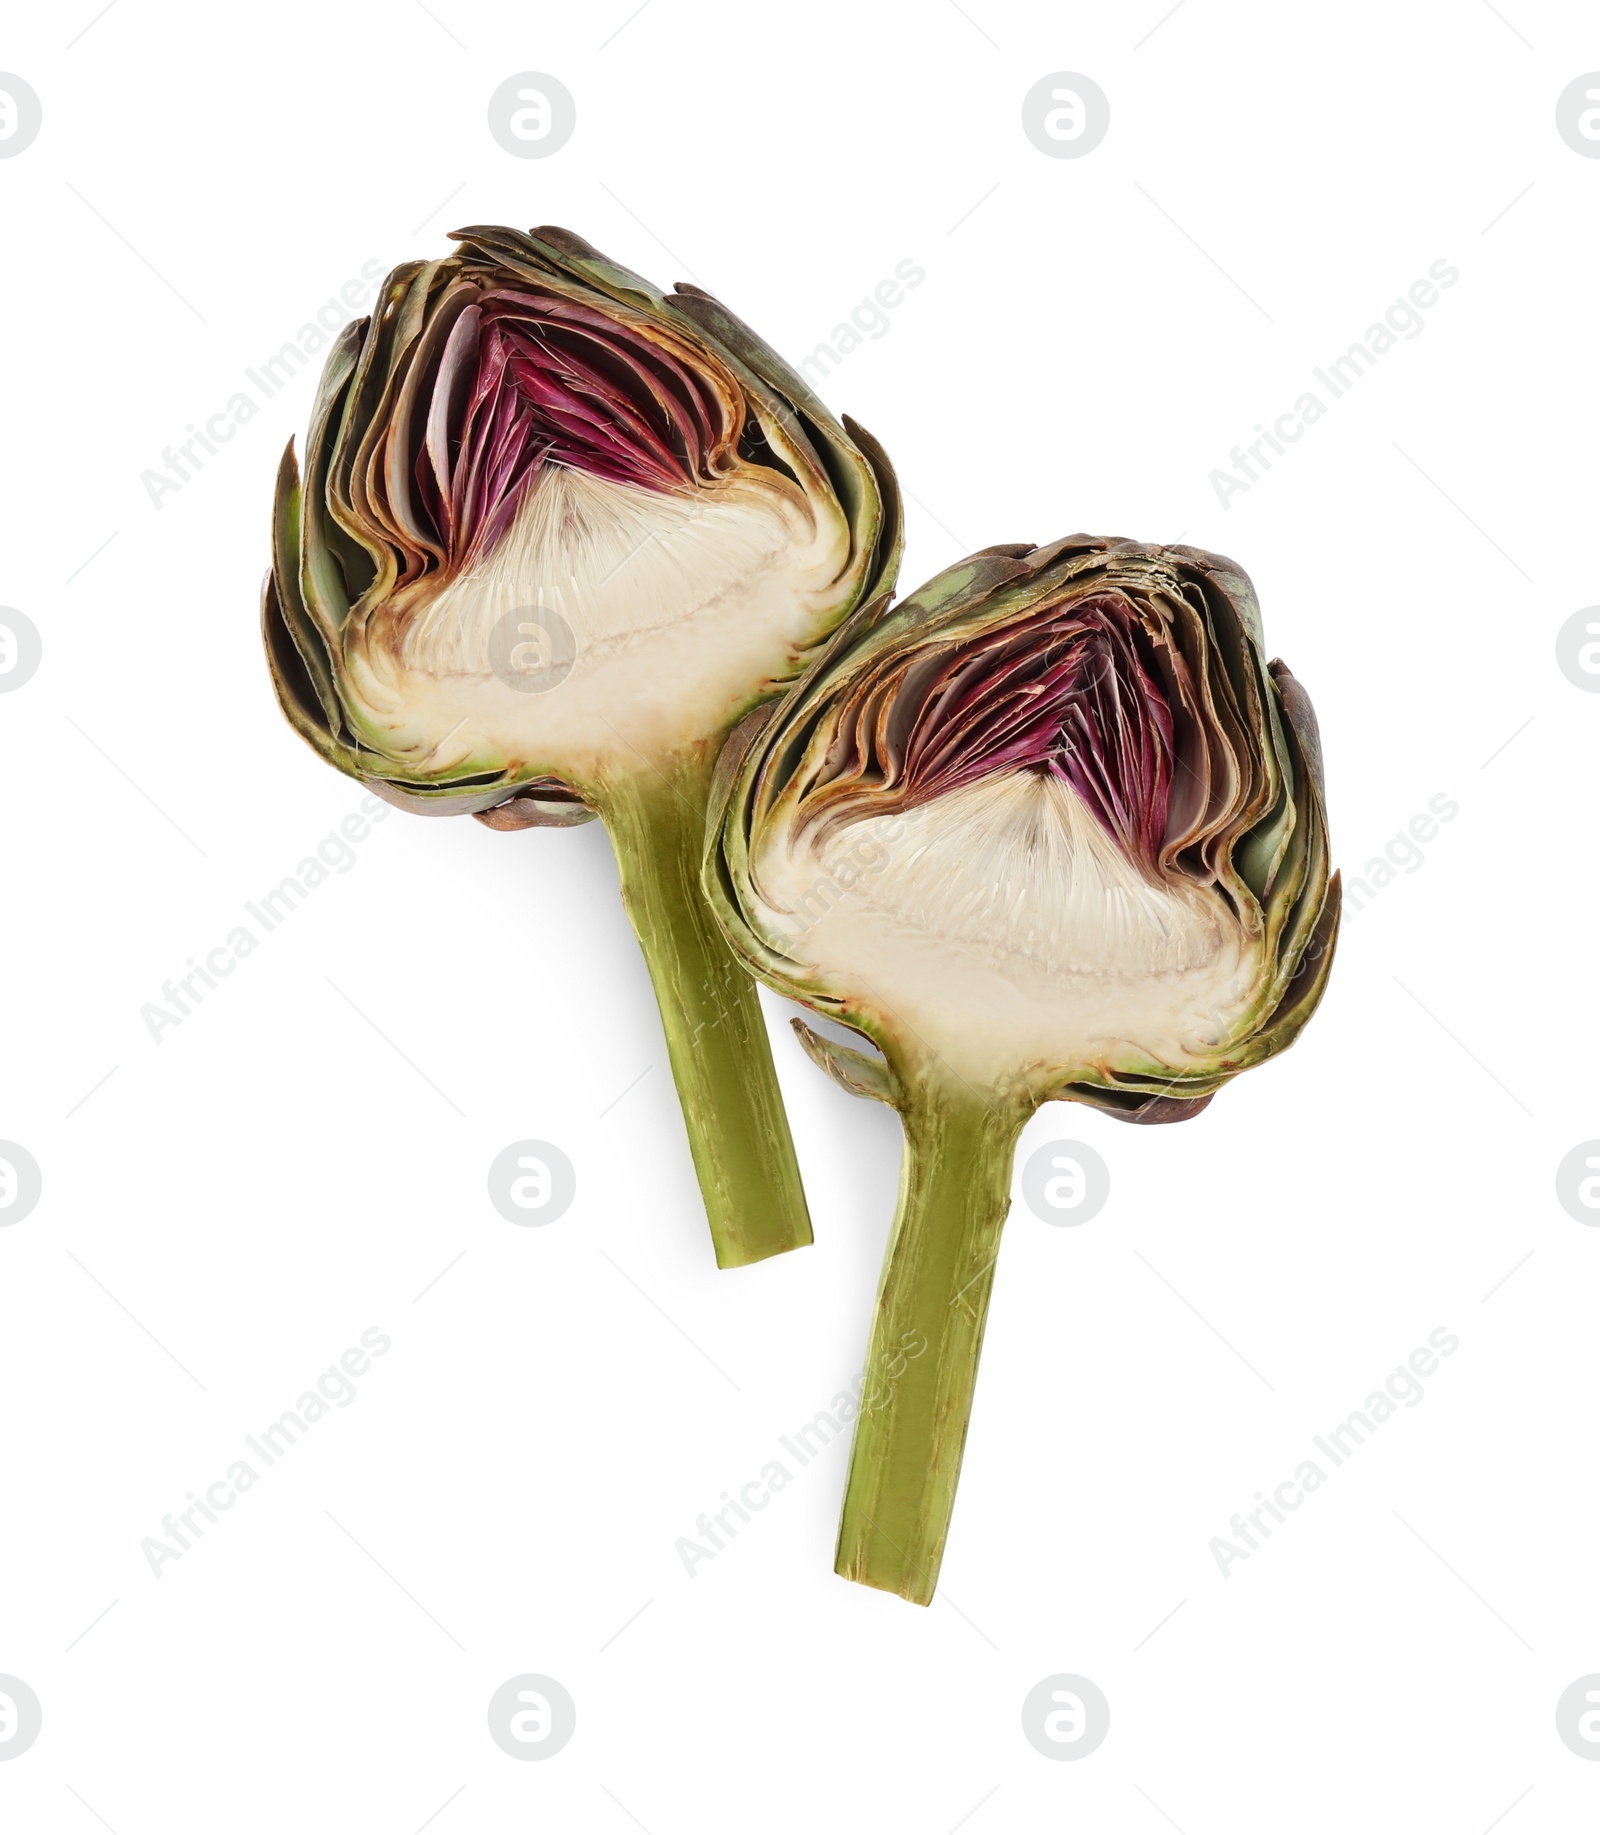 Photo of Halves of fresh raw artichoke on white background, top view